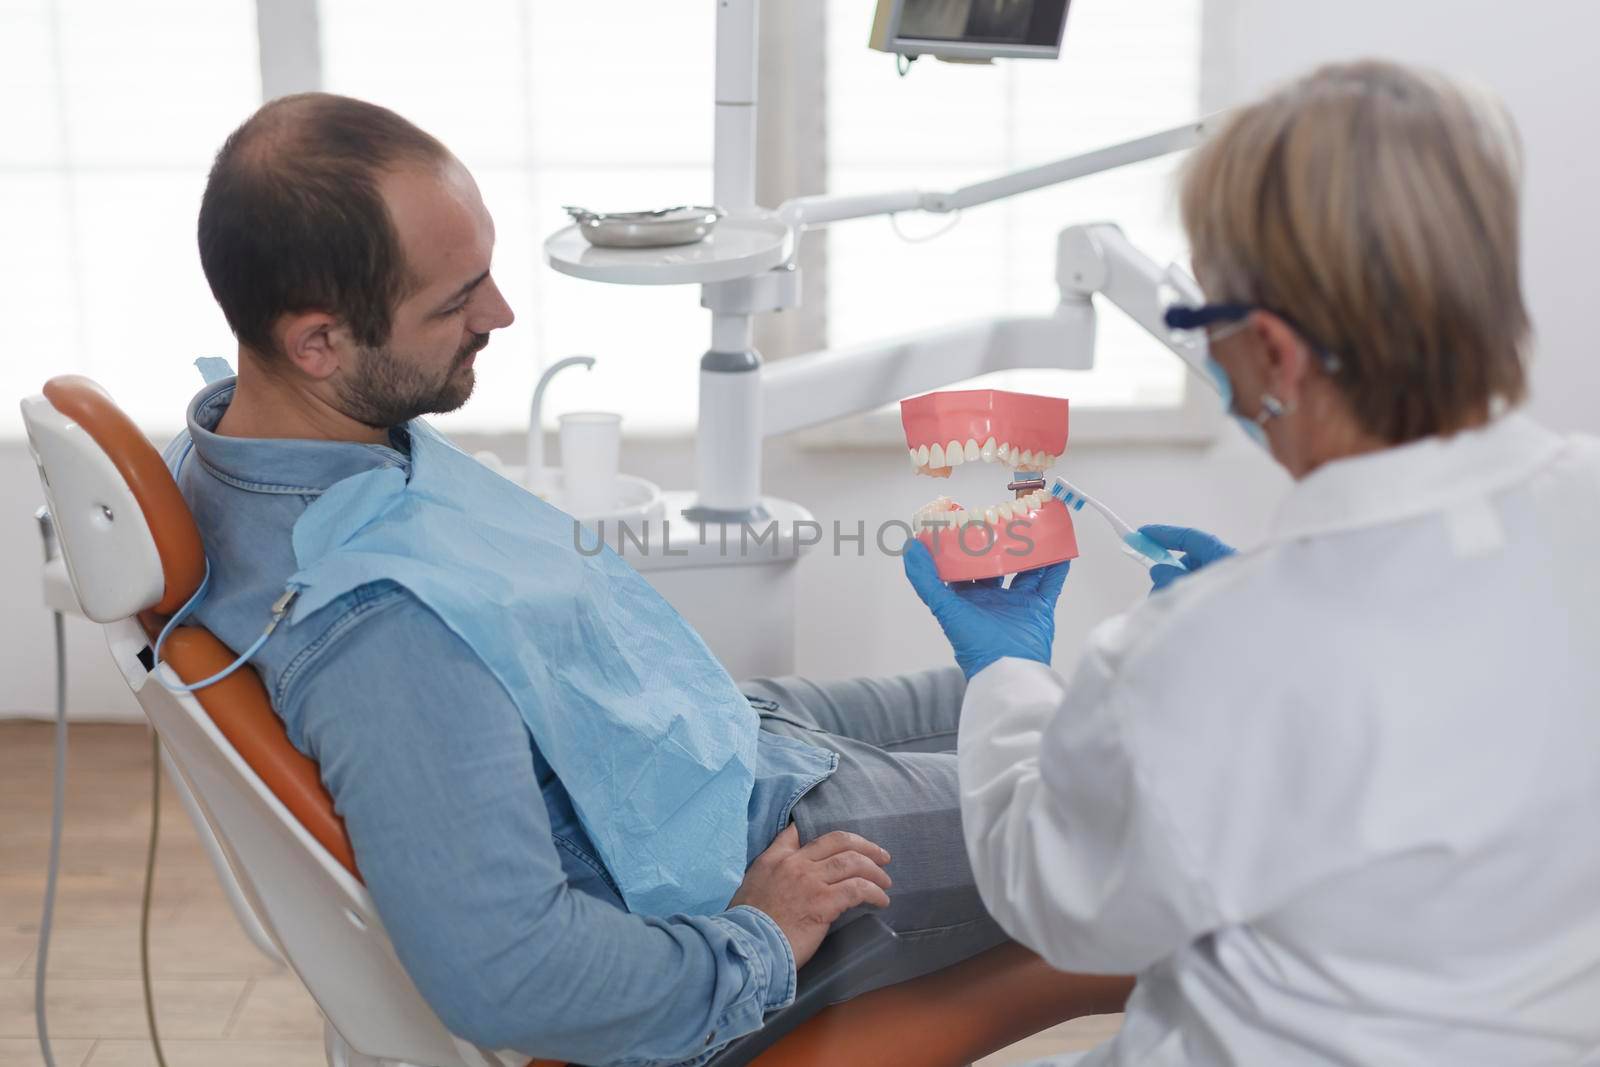 Dpecialist orthodontist showing ceramic jaw model to patient with toothache discussing carier treatment during stomatology consultation in dentistry office room. Doctor woman explaining oral hygiene